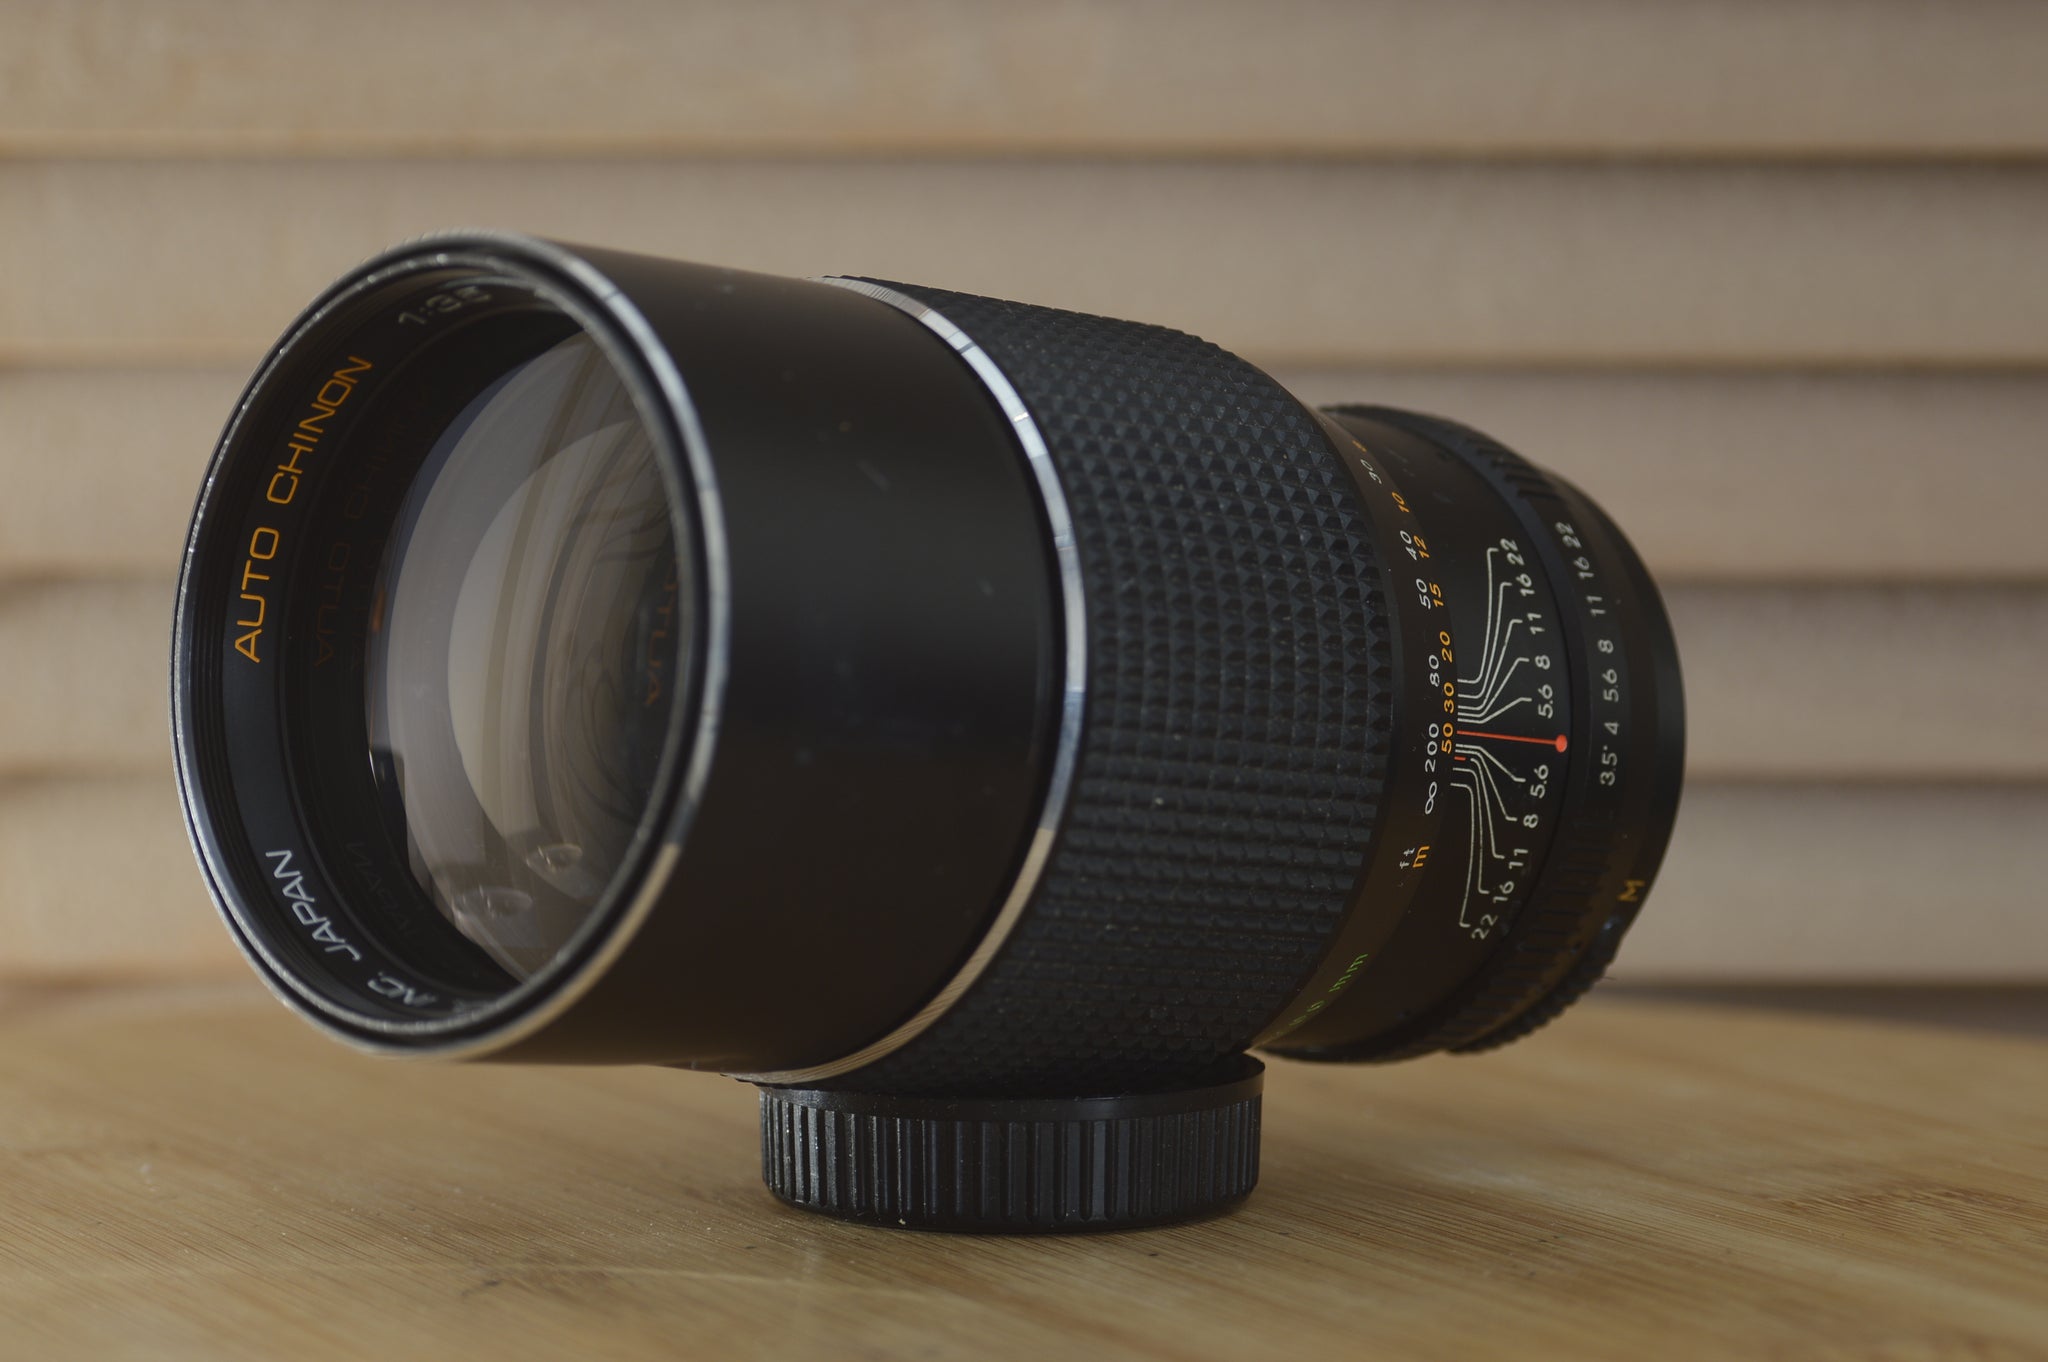 Chinon M42 Auto 200mm f3.5  lens.  A beautiful example of vintage glass and a great lens for your vintage Camera or for digital conversion - RewindCameras quality vintage cameras, fully teste